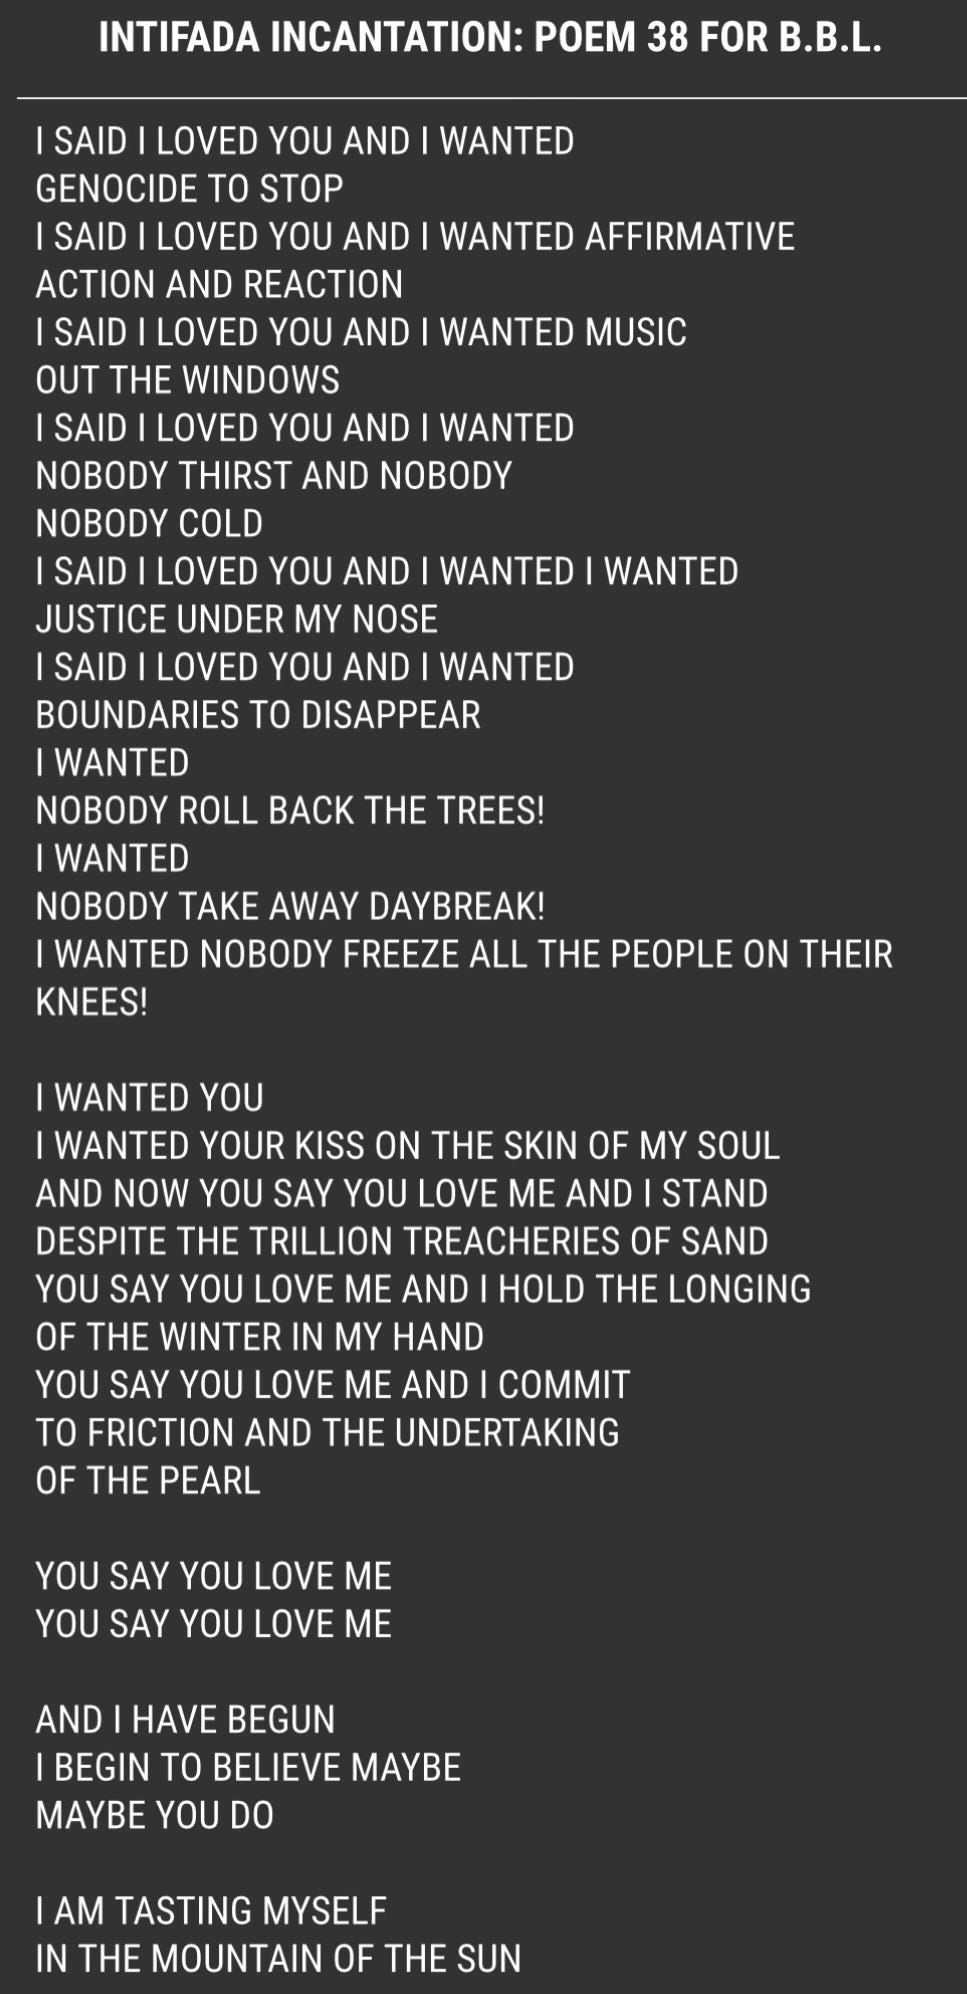 “Intifada Incantation: Poem 38 for b.b.L.” by June Jordan   I SAID I LOVED YOU AND I WANTED GENOCIDE TO STOP I SAID I LOVED YOU AND I WANTED AFFIRMATIVE ACTION AND REACTION I SAID I LOVED YOU AND I WANTED MUSIC OUT THE WINDOWS I SAID I LOVED YOU AND I WANTED NOBODY THIRST AND NOBODY NOBODY COLD I SAID I LOVED YOU AND I WANTED I WANTED JUSTICE UNDER MY NOSE I SAID I LOVED YOU AND I WANTED BOUNDARIES TO DISAPPEAR I WANTED NOBODY ROLL BACK THE TREES! I WANTED NOBODY TAKE AWAY DAYBREAK! I WANTED NOBODY FREEZE ALL THE PEOPLE ON THEIR KNEES!   I WANTED YOU I WANTED YOUR KISS ON THE SKIN OF MY SOUL AND NOW YOU SAY YOU LOVE ME AND I STAND DESPITE THE TRILLION TREACHERIES OF SAND YOU SAY YOU LOVE ME AND I HOLD THE LONGING OF THE WINTER IN MY HAND YOU SAY YOU LOVE ME AND I COMMIT TO FRICTION AND THE UNDERTAKING OF THE PEARL   YOU SAY YOU LOVE ME YOU SAY YOU LOVE ME   AND I HAVE BEGUN I BEGIN TO BELIEVE MAYBE MAYBE YOU DO   I AM TASTING MYSELF IN THE MOUNTAIN OF THE SUN